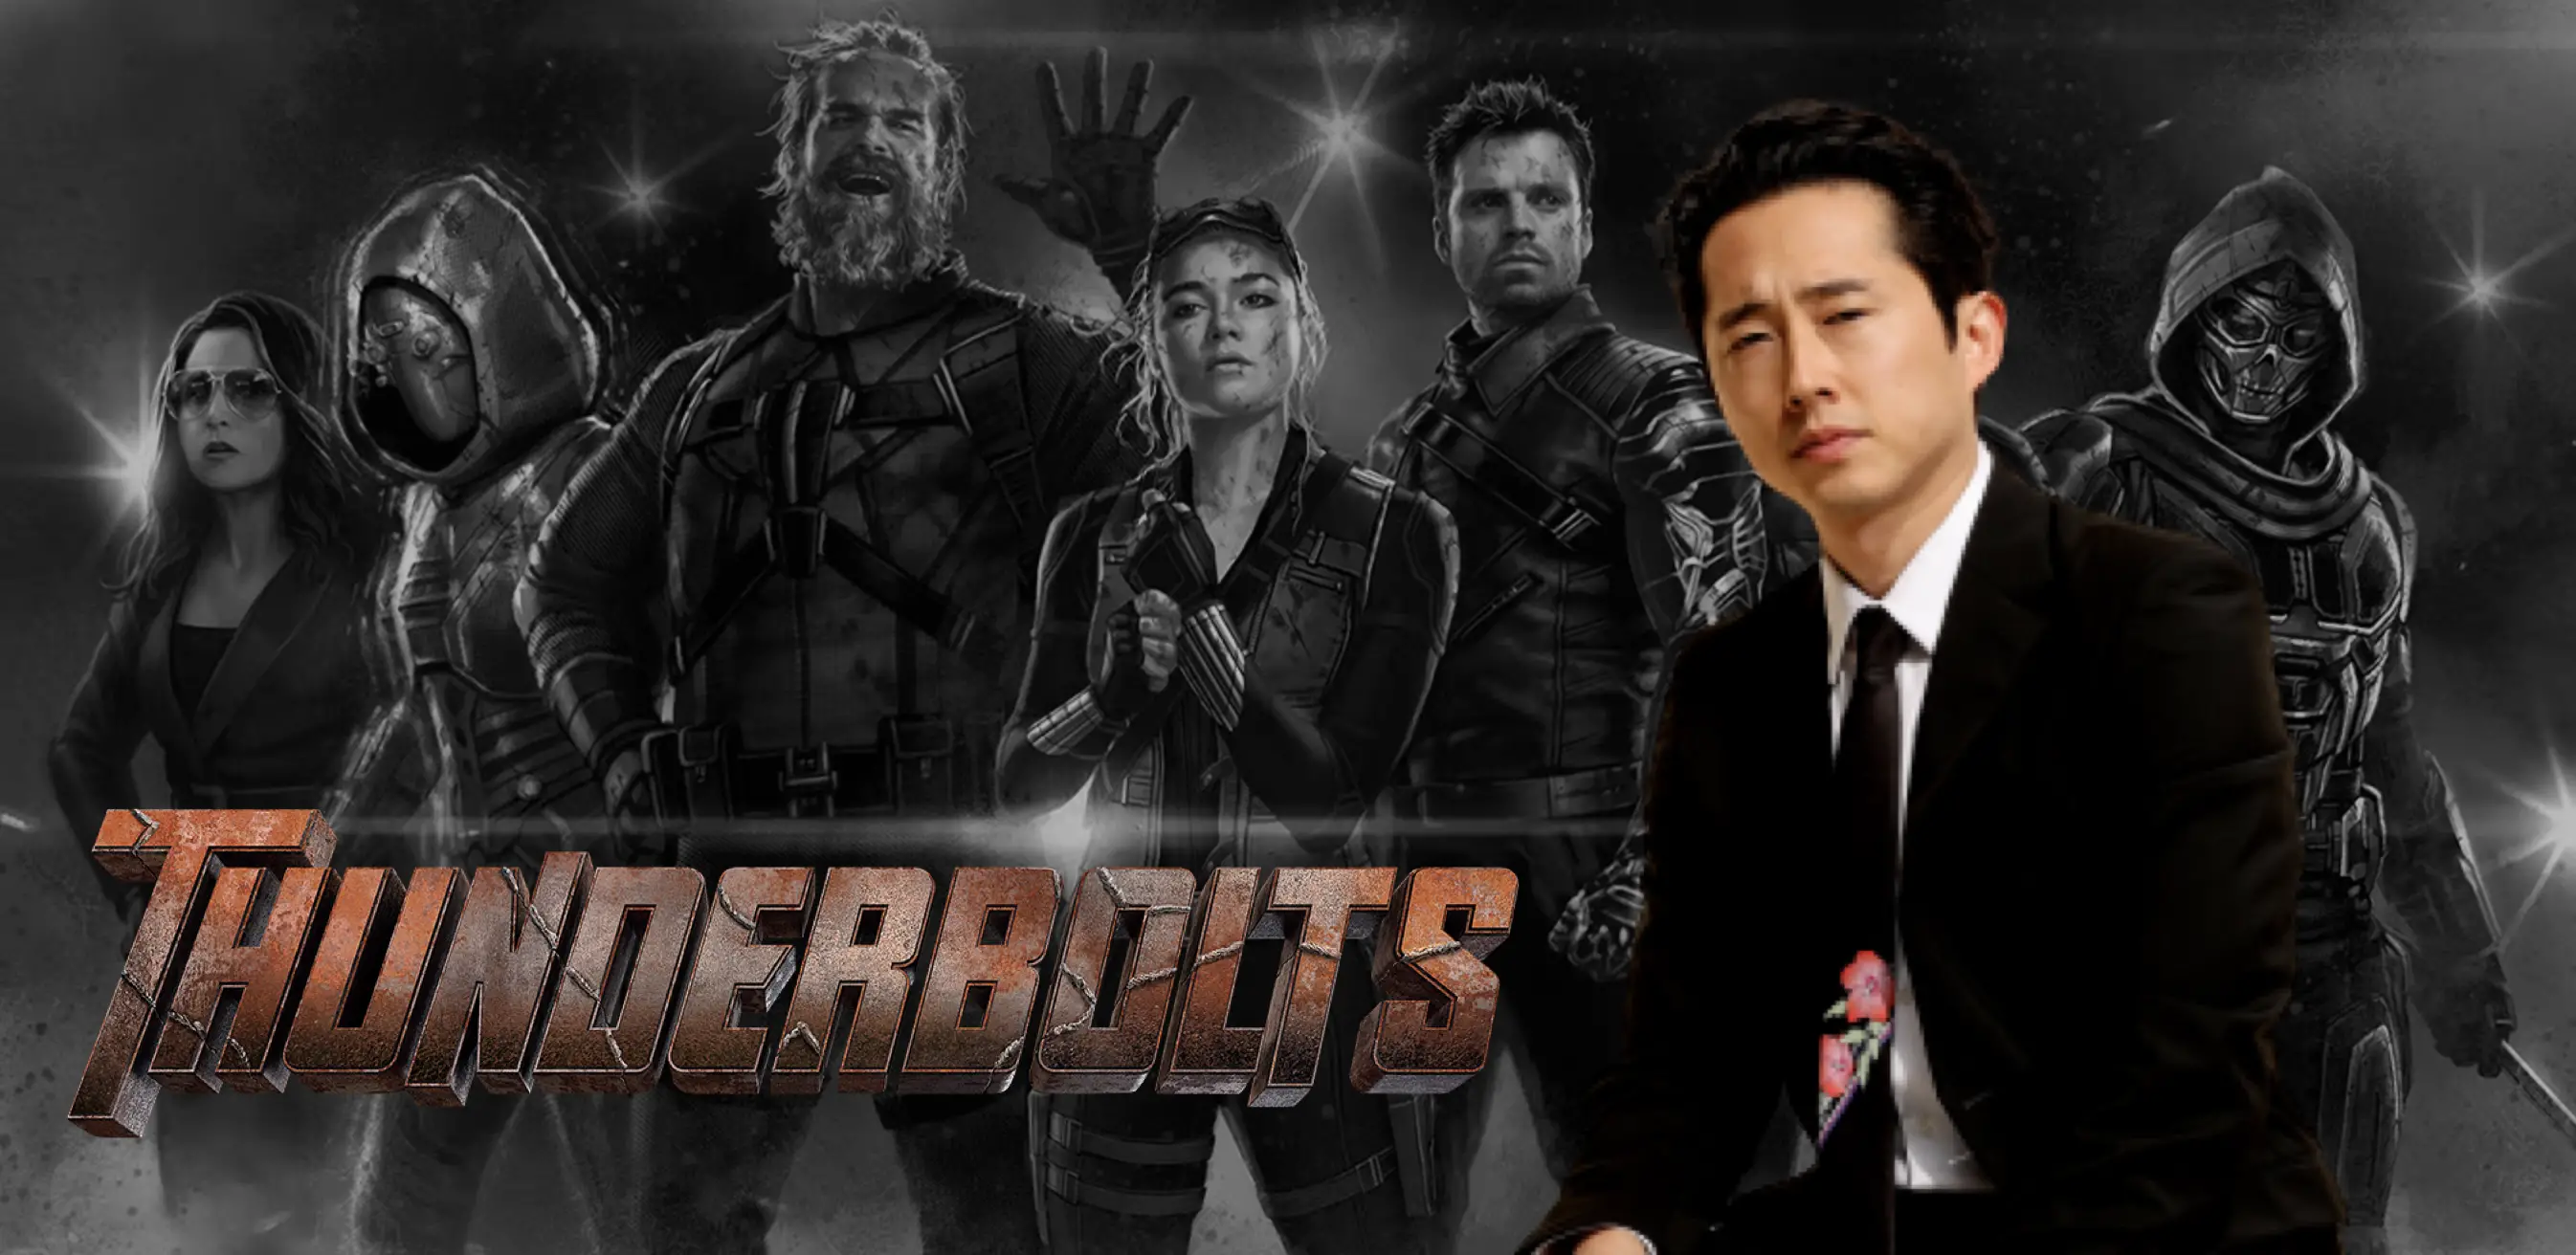 Steven Yeun Cast In Marvel’s Thunderbolts: Joins MCU In Major Role